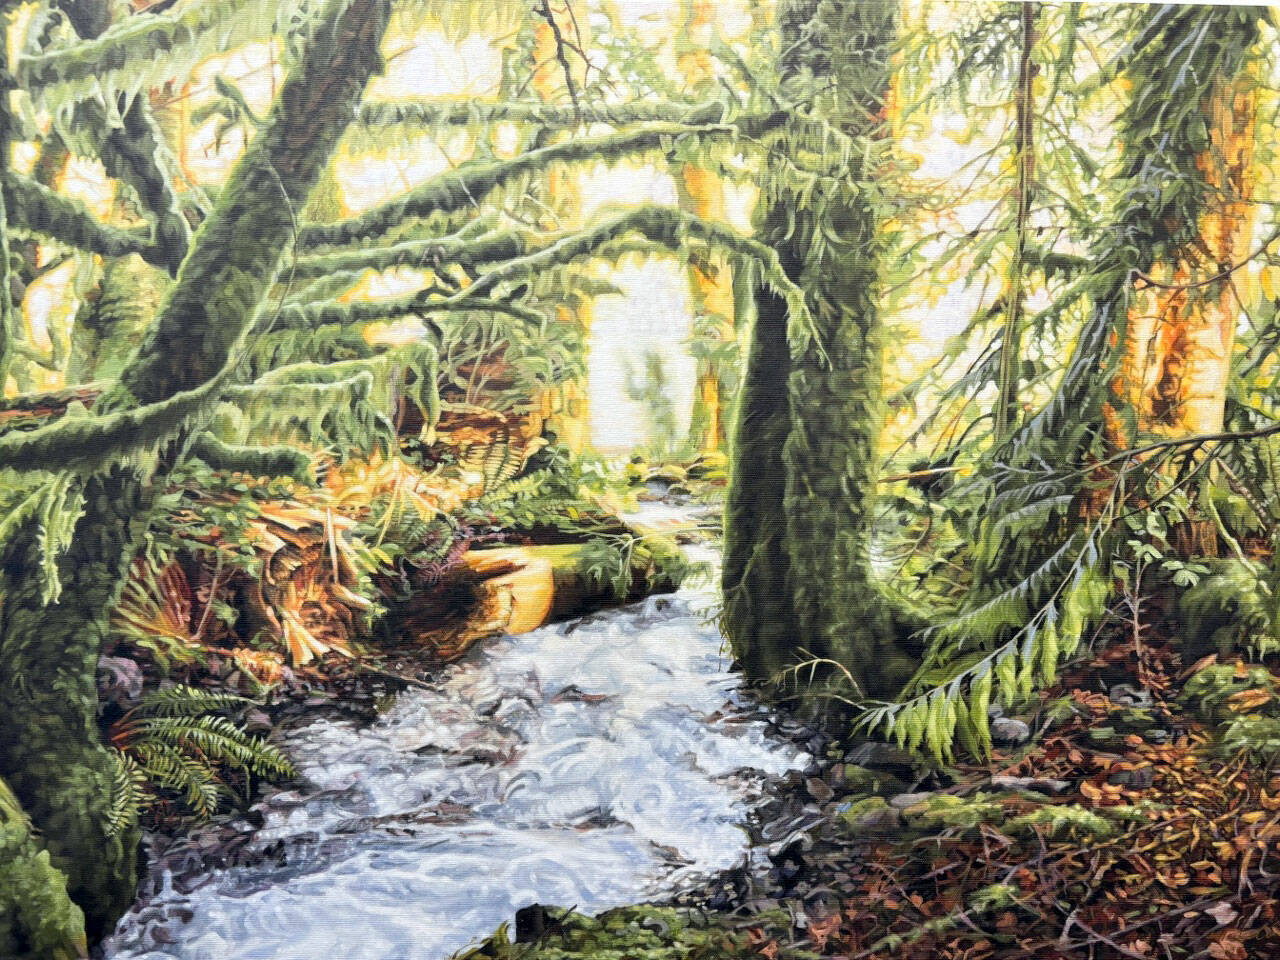 Linda Lundell paints detailed images of nature.